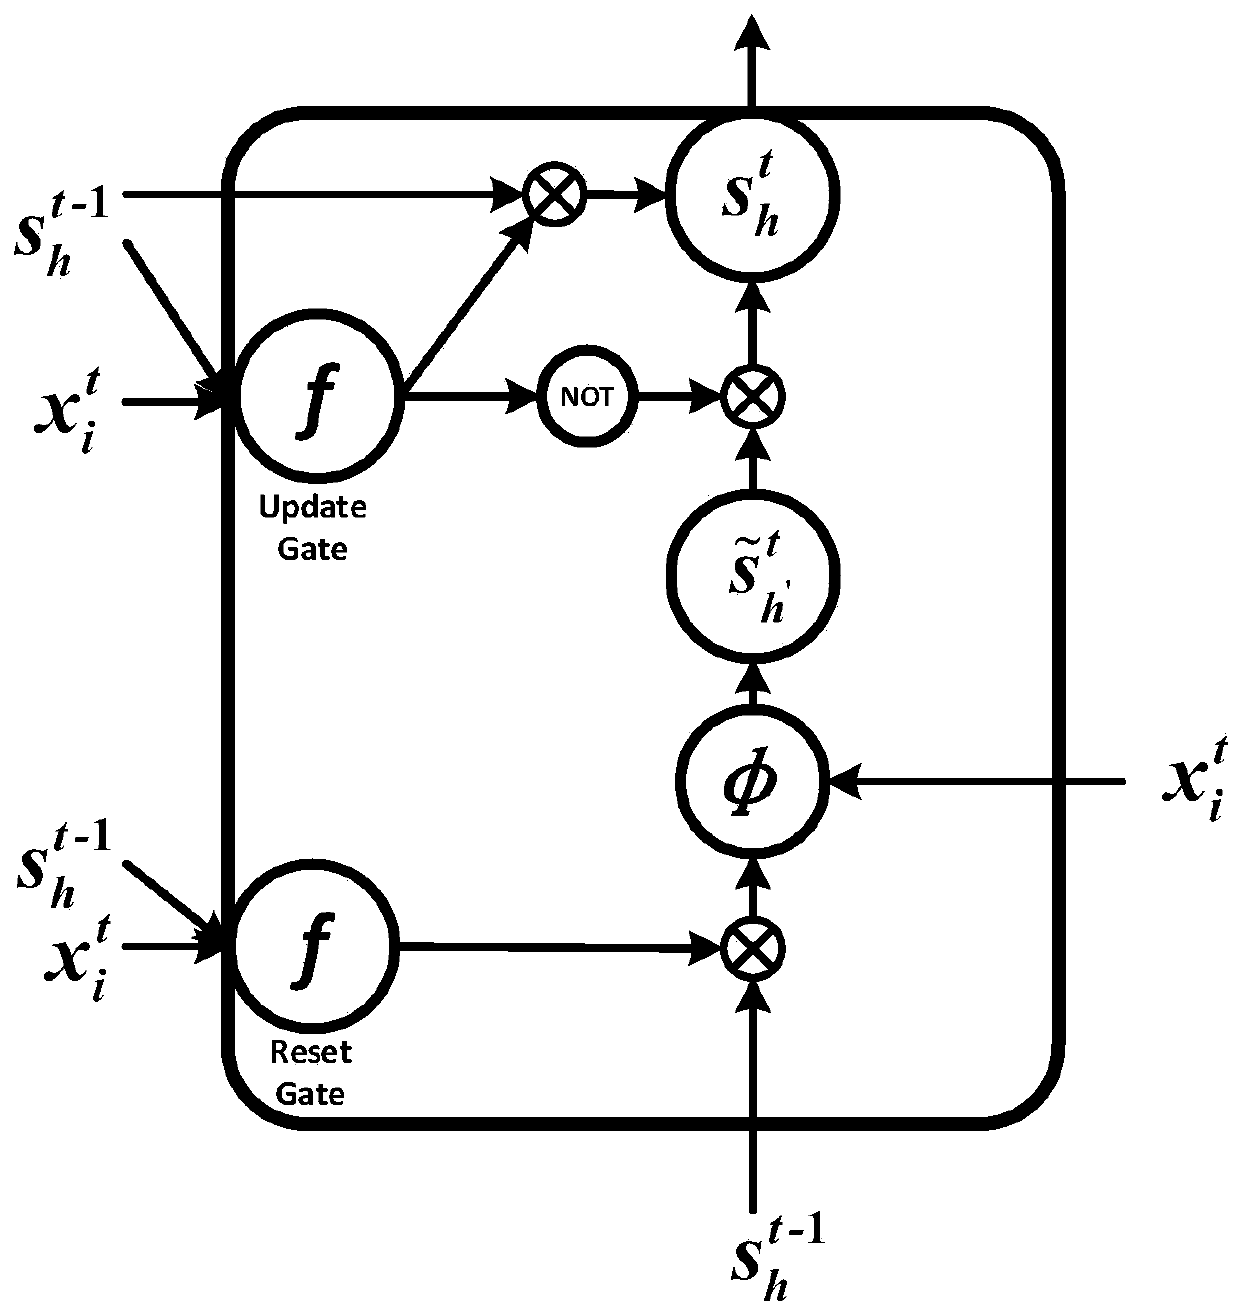 A short-term power load prediction method based on a GRU neural network and transfer learning